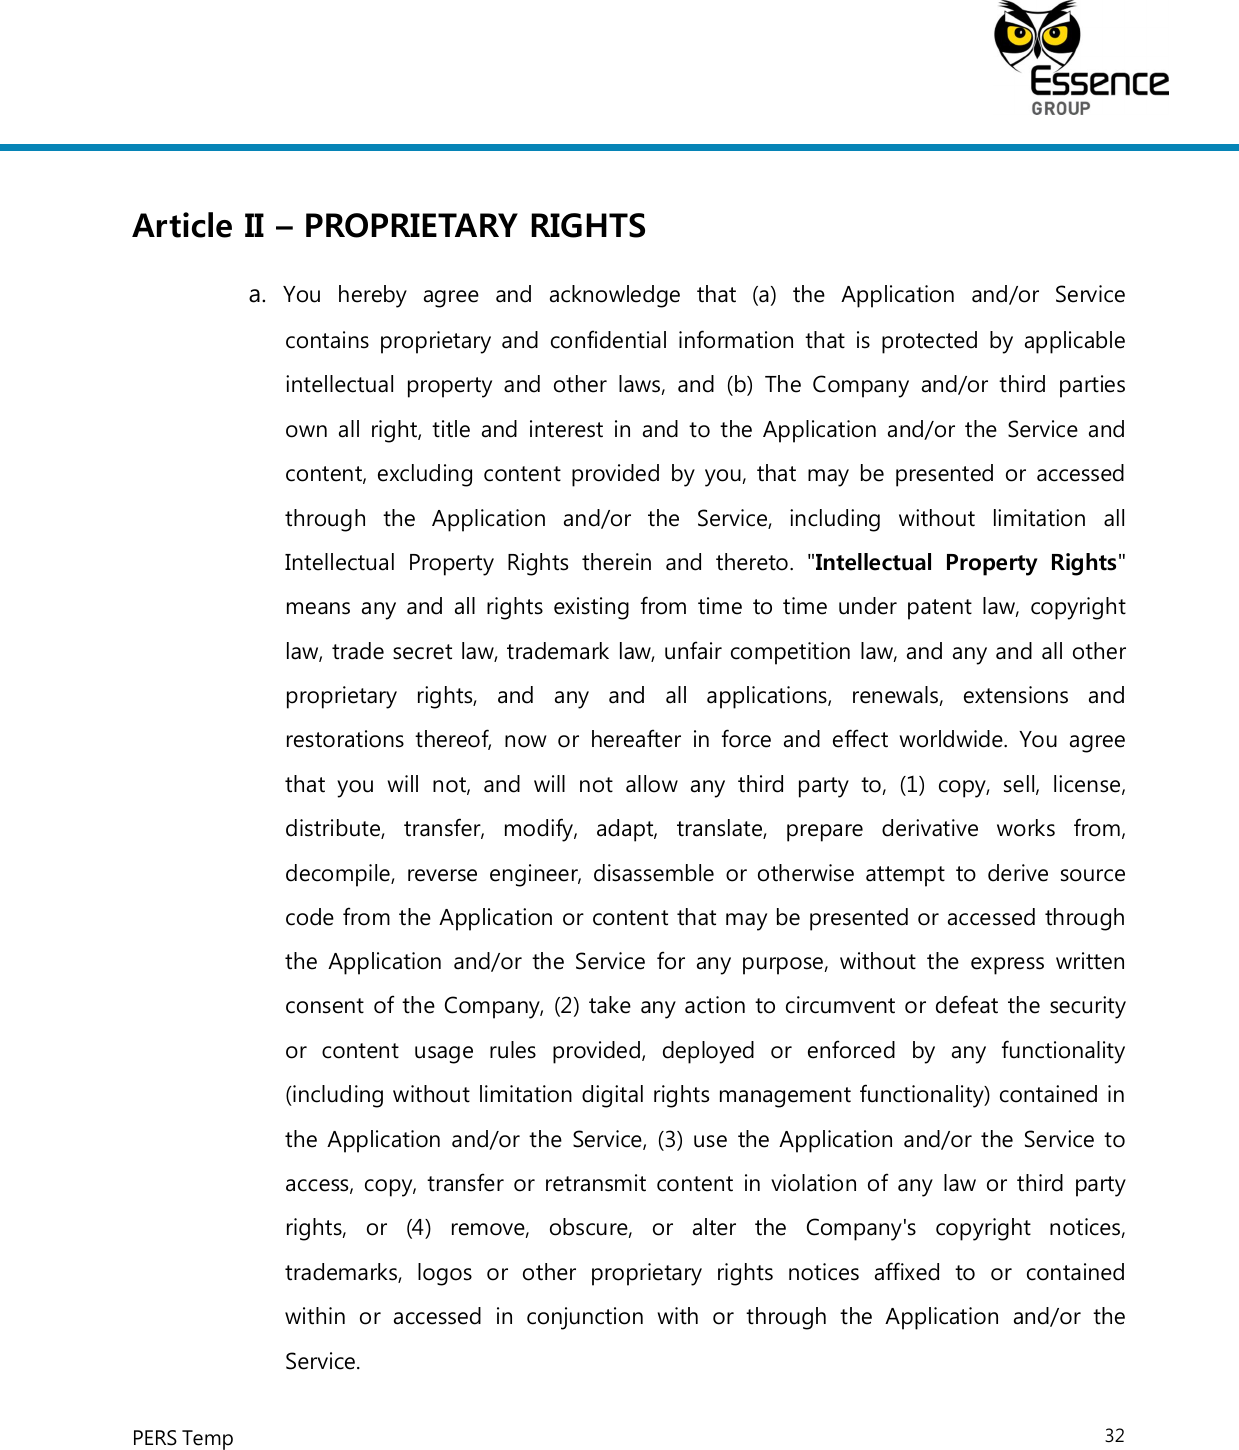     PERS Temp    32  Article II – PROPRIETARY RIGHTS a.  You  hereby  agree  and  acknowledge  that  (a)  the  Application  and/or  Service contains proprietary and confidential information that is protected by  applicable intellectual  property  and  other  laws,  and  (b)  The  Company  and/or  third parties own all right, title and interest in and to the Application and/or the Service and content, excluding content provided by you, that may be presented or accessed through  the  Application  and/or  the  Service,  including  without  limitation  all Intellectual  Property  Rights  therein  and  thereto.  &quot;Intellectual  Property  Rights&quot; means any and all rights existing from time to time under patent law, copyright law, trade secret law, trademark law, unfair competition law, and any and all other proprietary  rights,  and  any  and  all  applications,  renewals,  extensions  and restorations thereof, now or  hereafter  in  force  and effect  worldwide.  You  agree that  you  will  not,  and  will  not  allow  any  third  party  to,  (1)  copy,  sell,  license, distribute,  transfer,  modify,  adapt,  translate,  prepare  derivative  works  from, decompile, reverse engineer, disassemble or otherwise attempt to  derive source code from the Application or content that may be presented or accessed through the Application and/or  the Service  for  any purpose, without the  express written consent of the Company, (2) take any action to circumvent or defeat the security or  content  usage  rules  provided,  deployed  or  enforced  by  any  functionality (including without limitation digital rights management functionality) contained in the Application and/or the Service, (3) use the Application and/or the Service to access, copy, transfer or retransmit content in violation of any law or third party rights,  or  (4)  remove,  obscure,  or  alter  the  Company&apos;s  copyright  notices, trademarks,  logos  or  other  proprietary  rights  notices  affixed  to  or  contained within  or  accessed  in  conjunction  with  or  through  the  Application  and/or  the Service. 